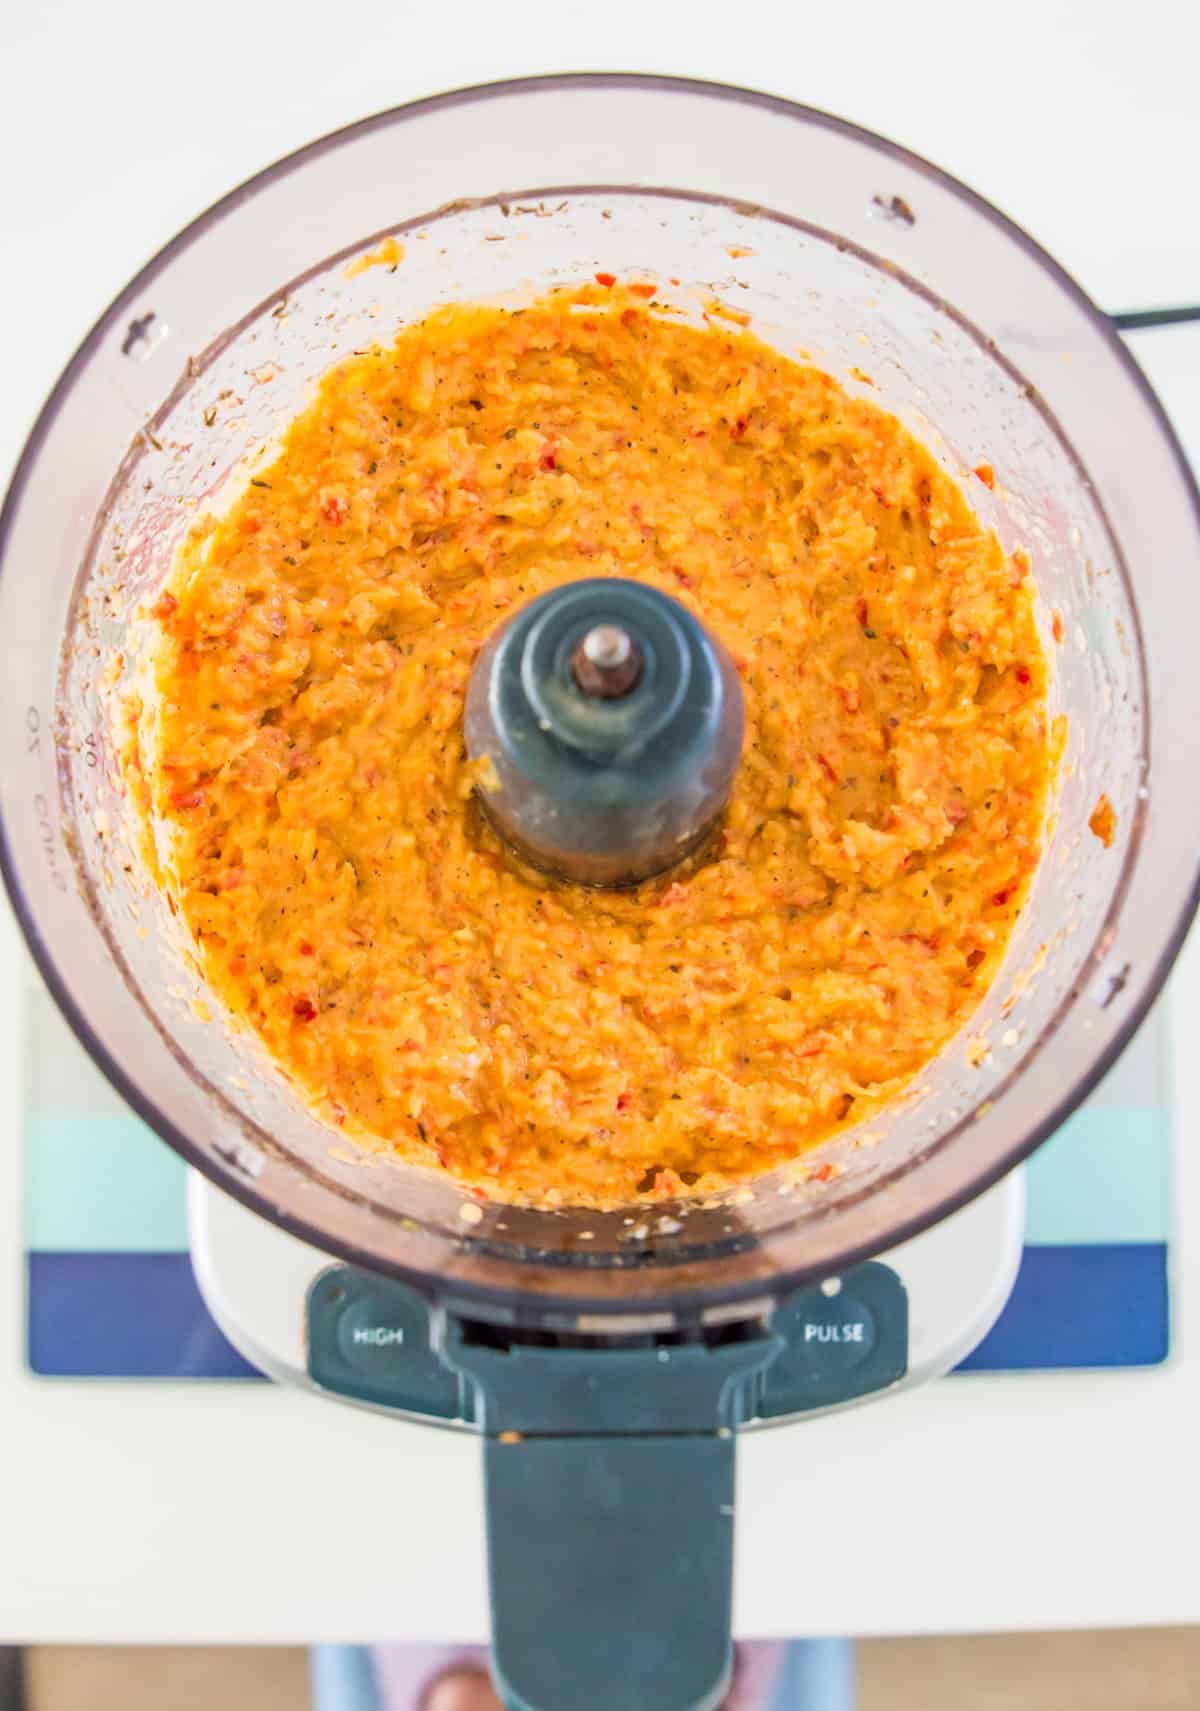 A food processor with a roasted red pepper dip that has been blended in it.